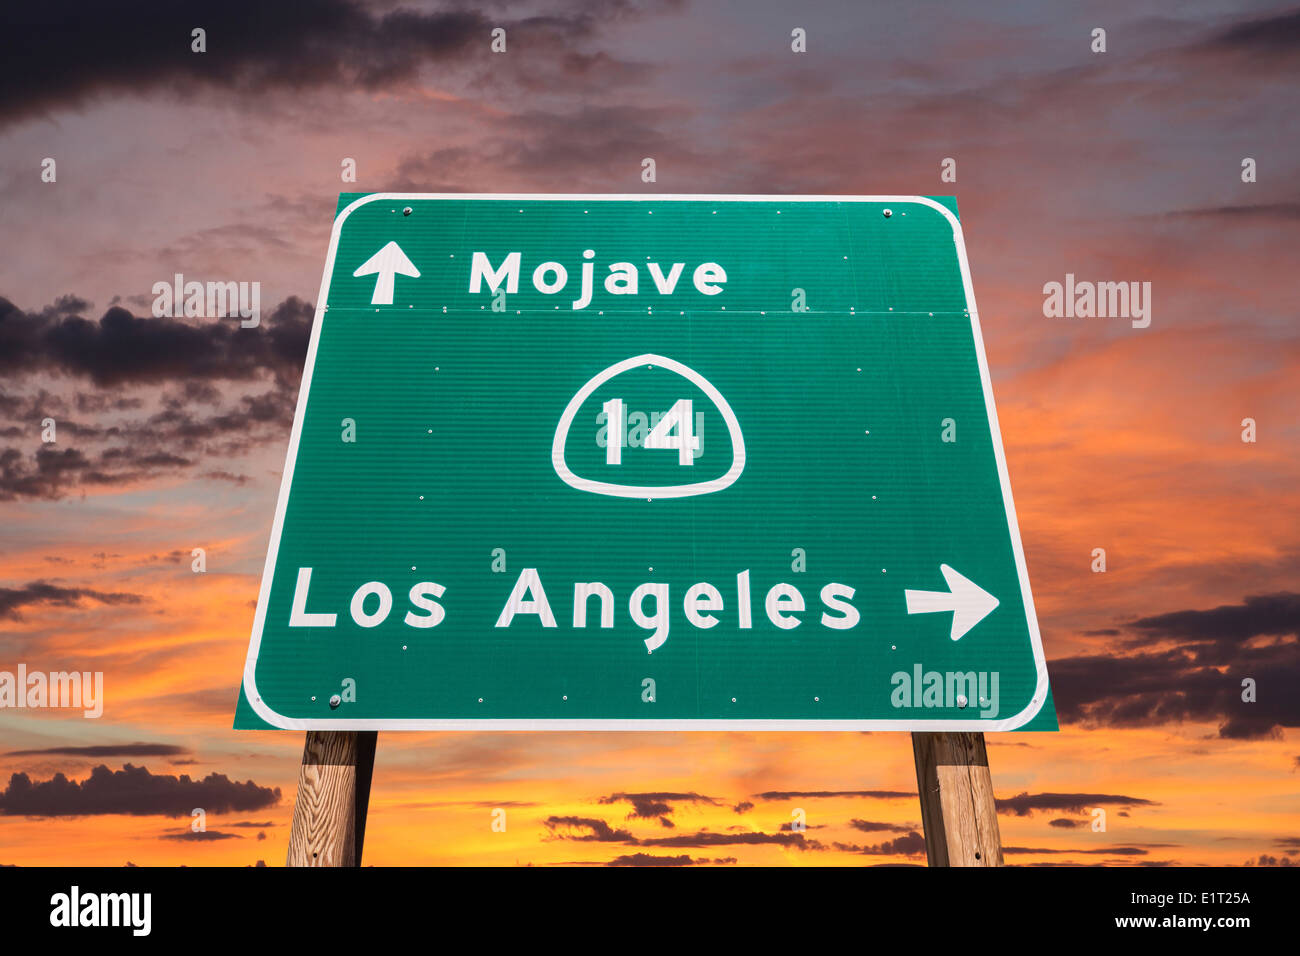 Mojave desert freeway sign towards Los Angeles with sunset sly. Stock Photo